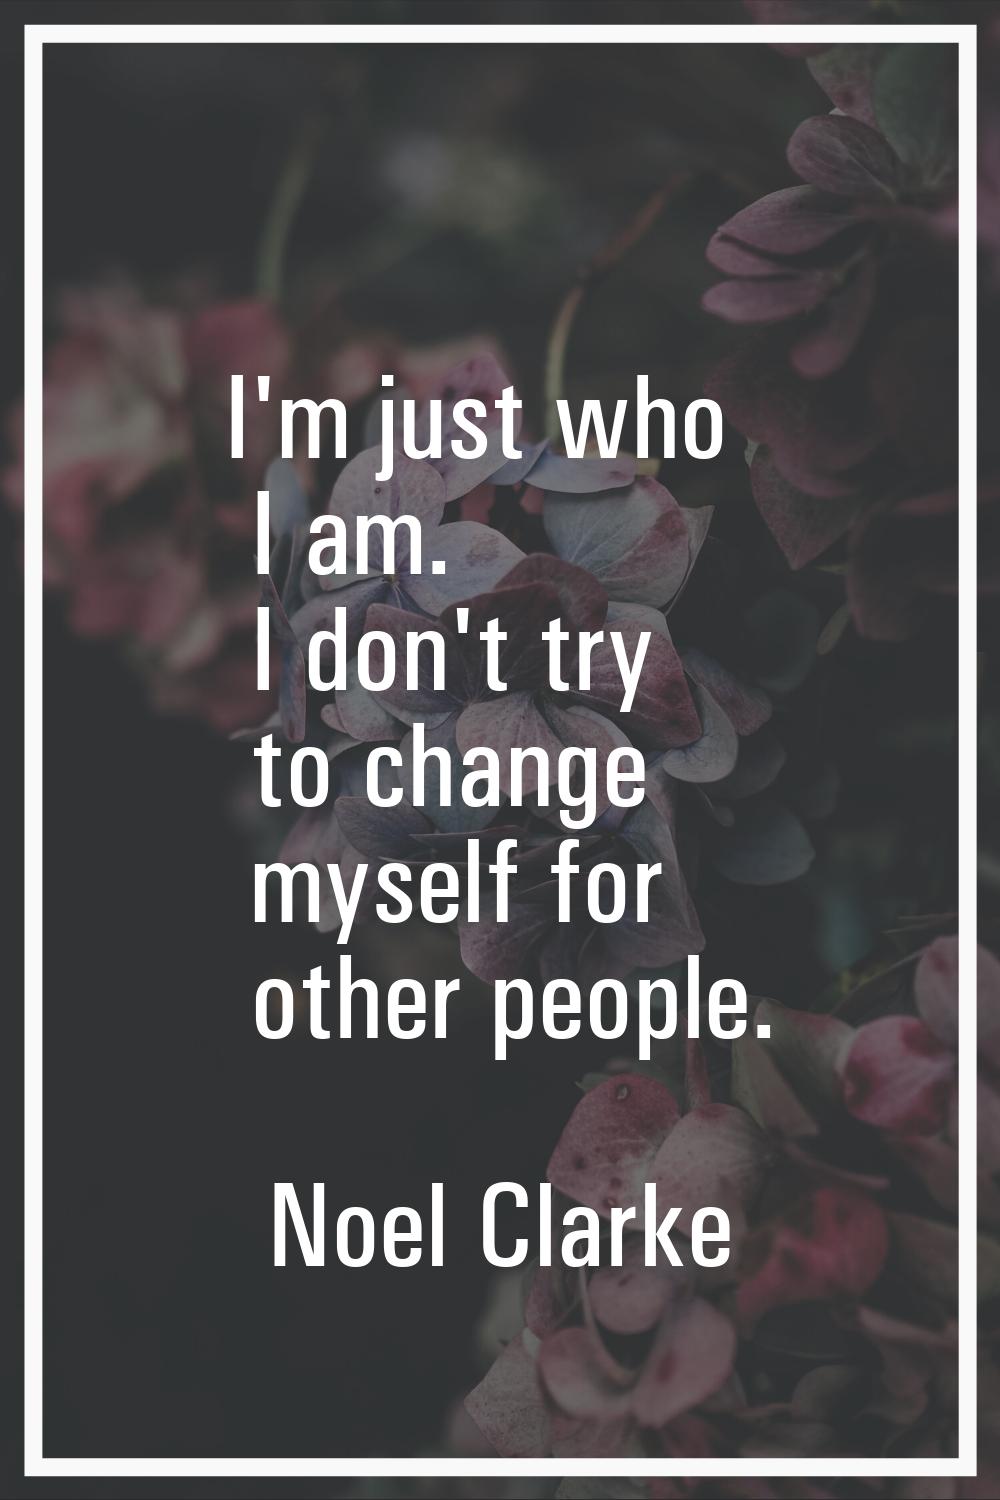 I'm just who I am. I don't try to change myself for other people.